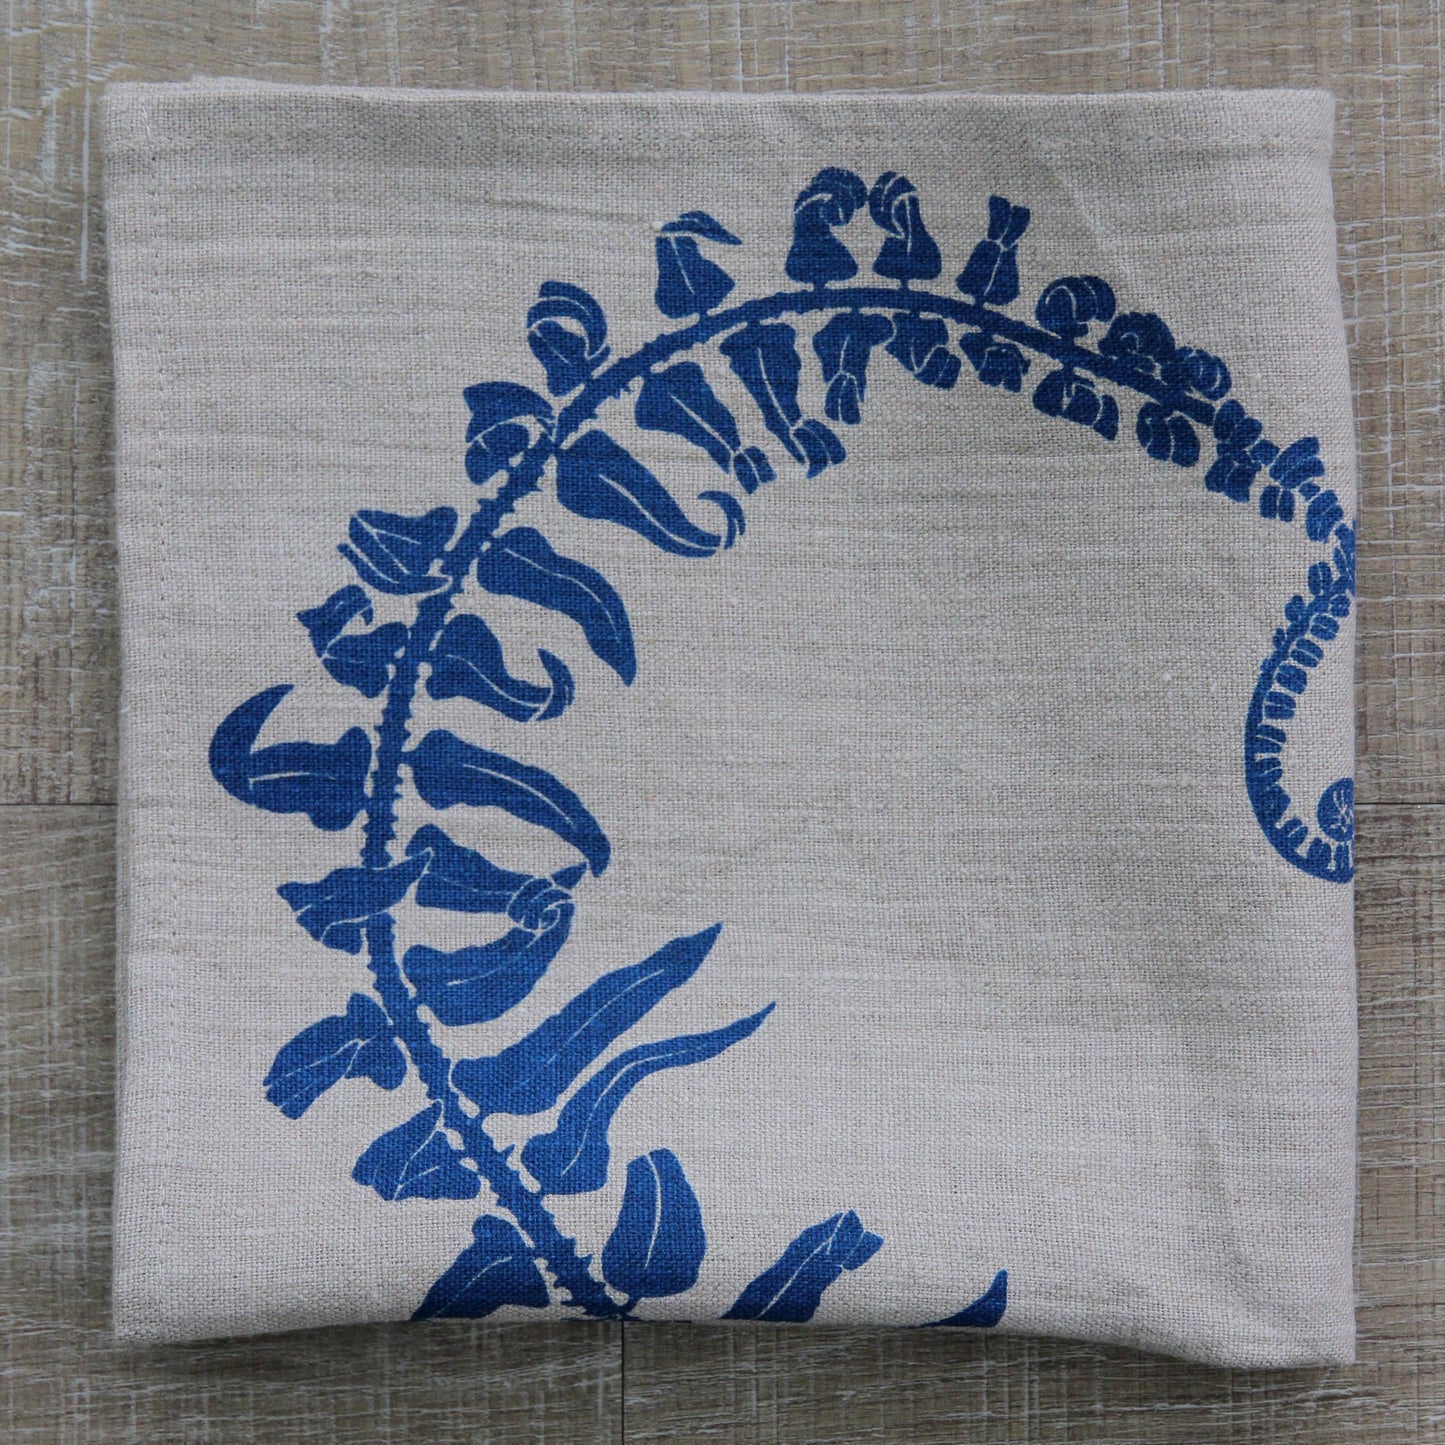 Sword Fern Heart Napkin in Clear Blue on Natural Flax Linen